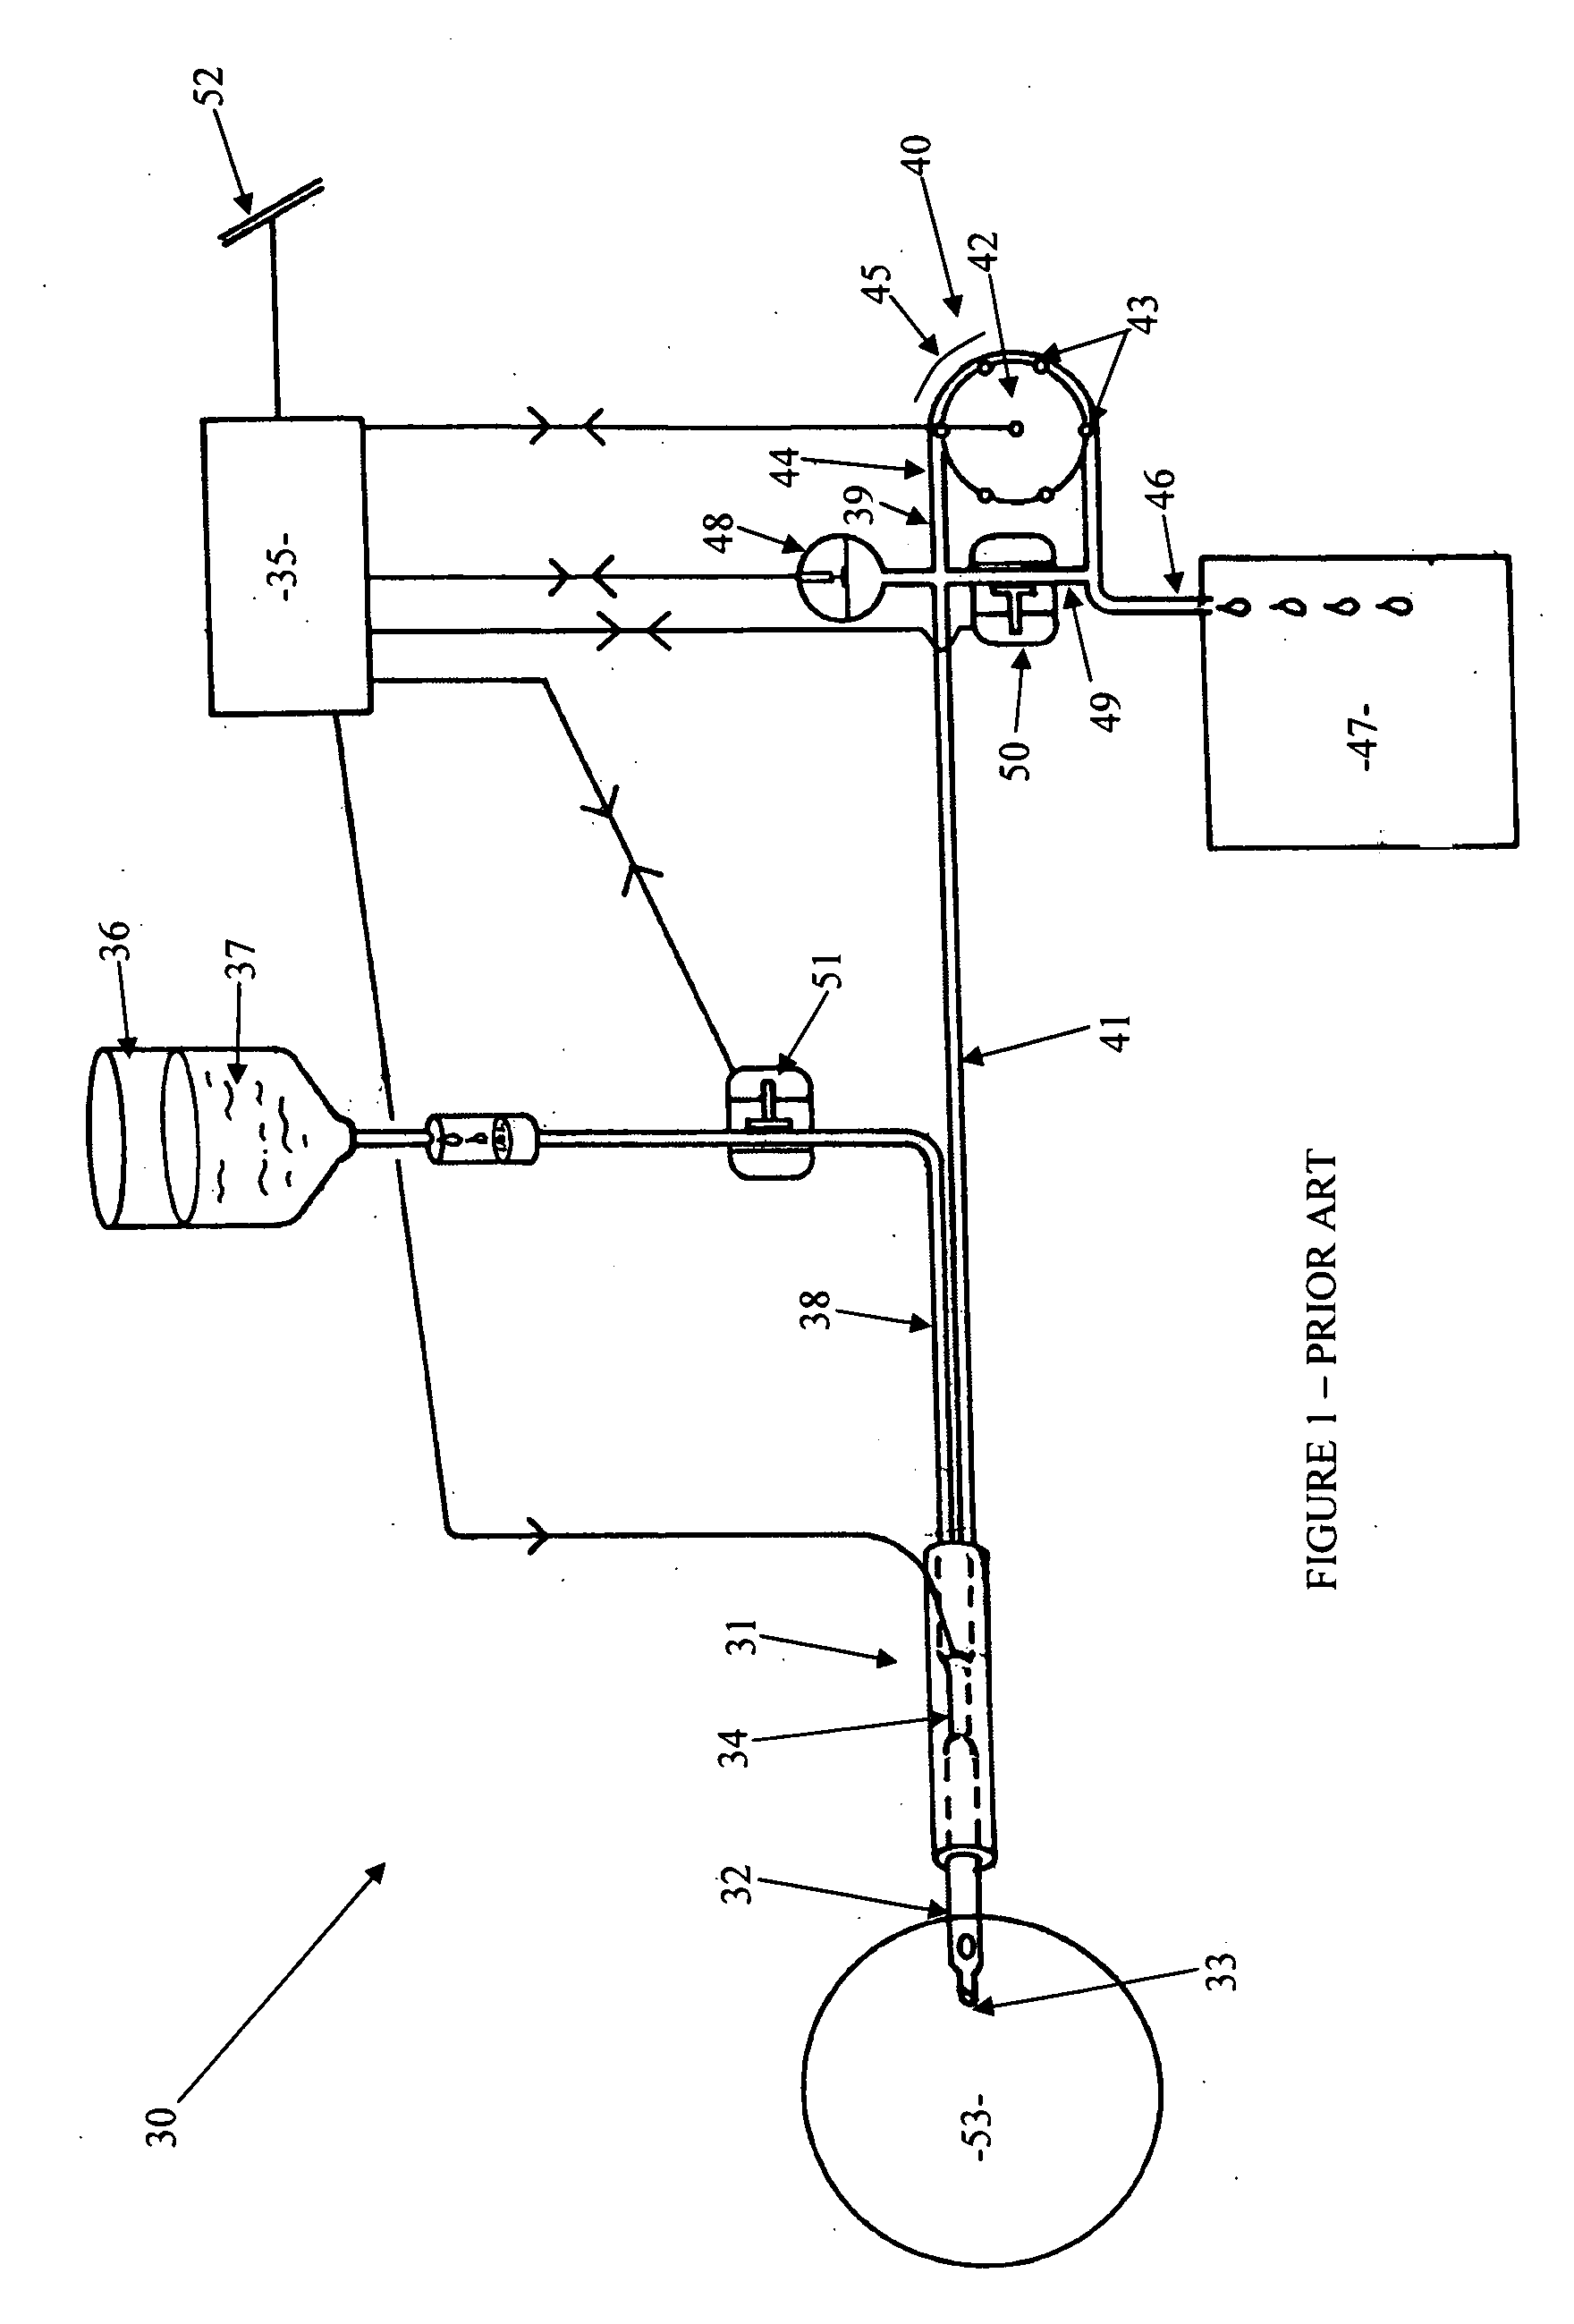 Phacoemulsification machine with post-occlusion surge control system and related method